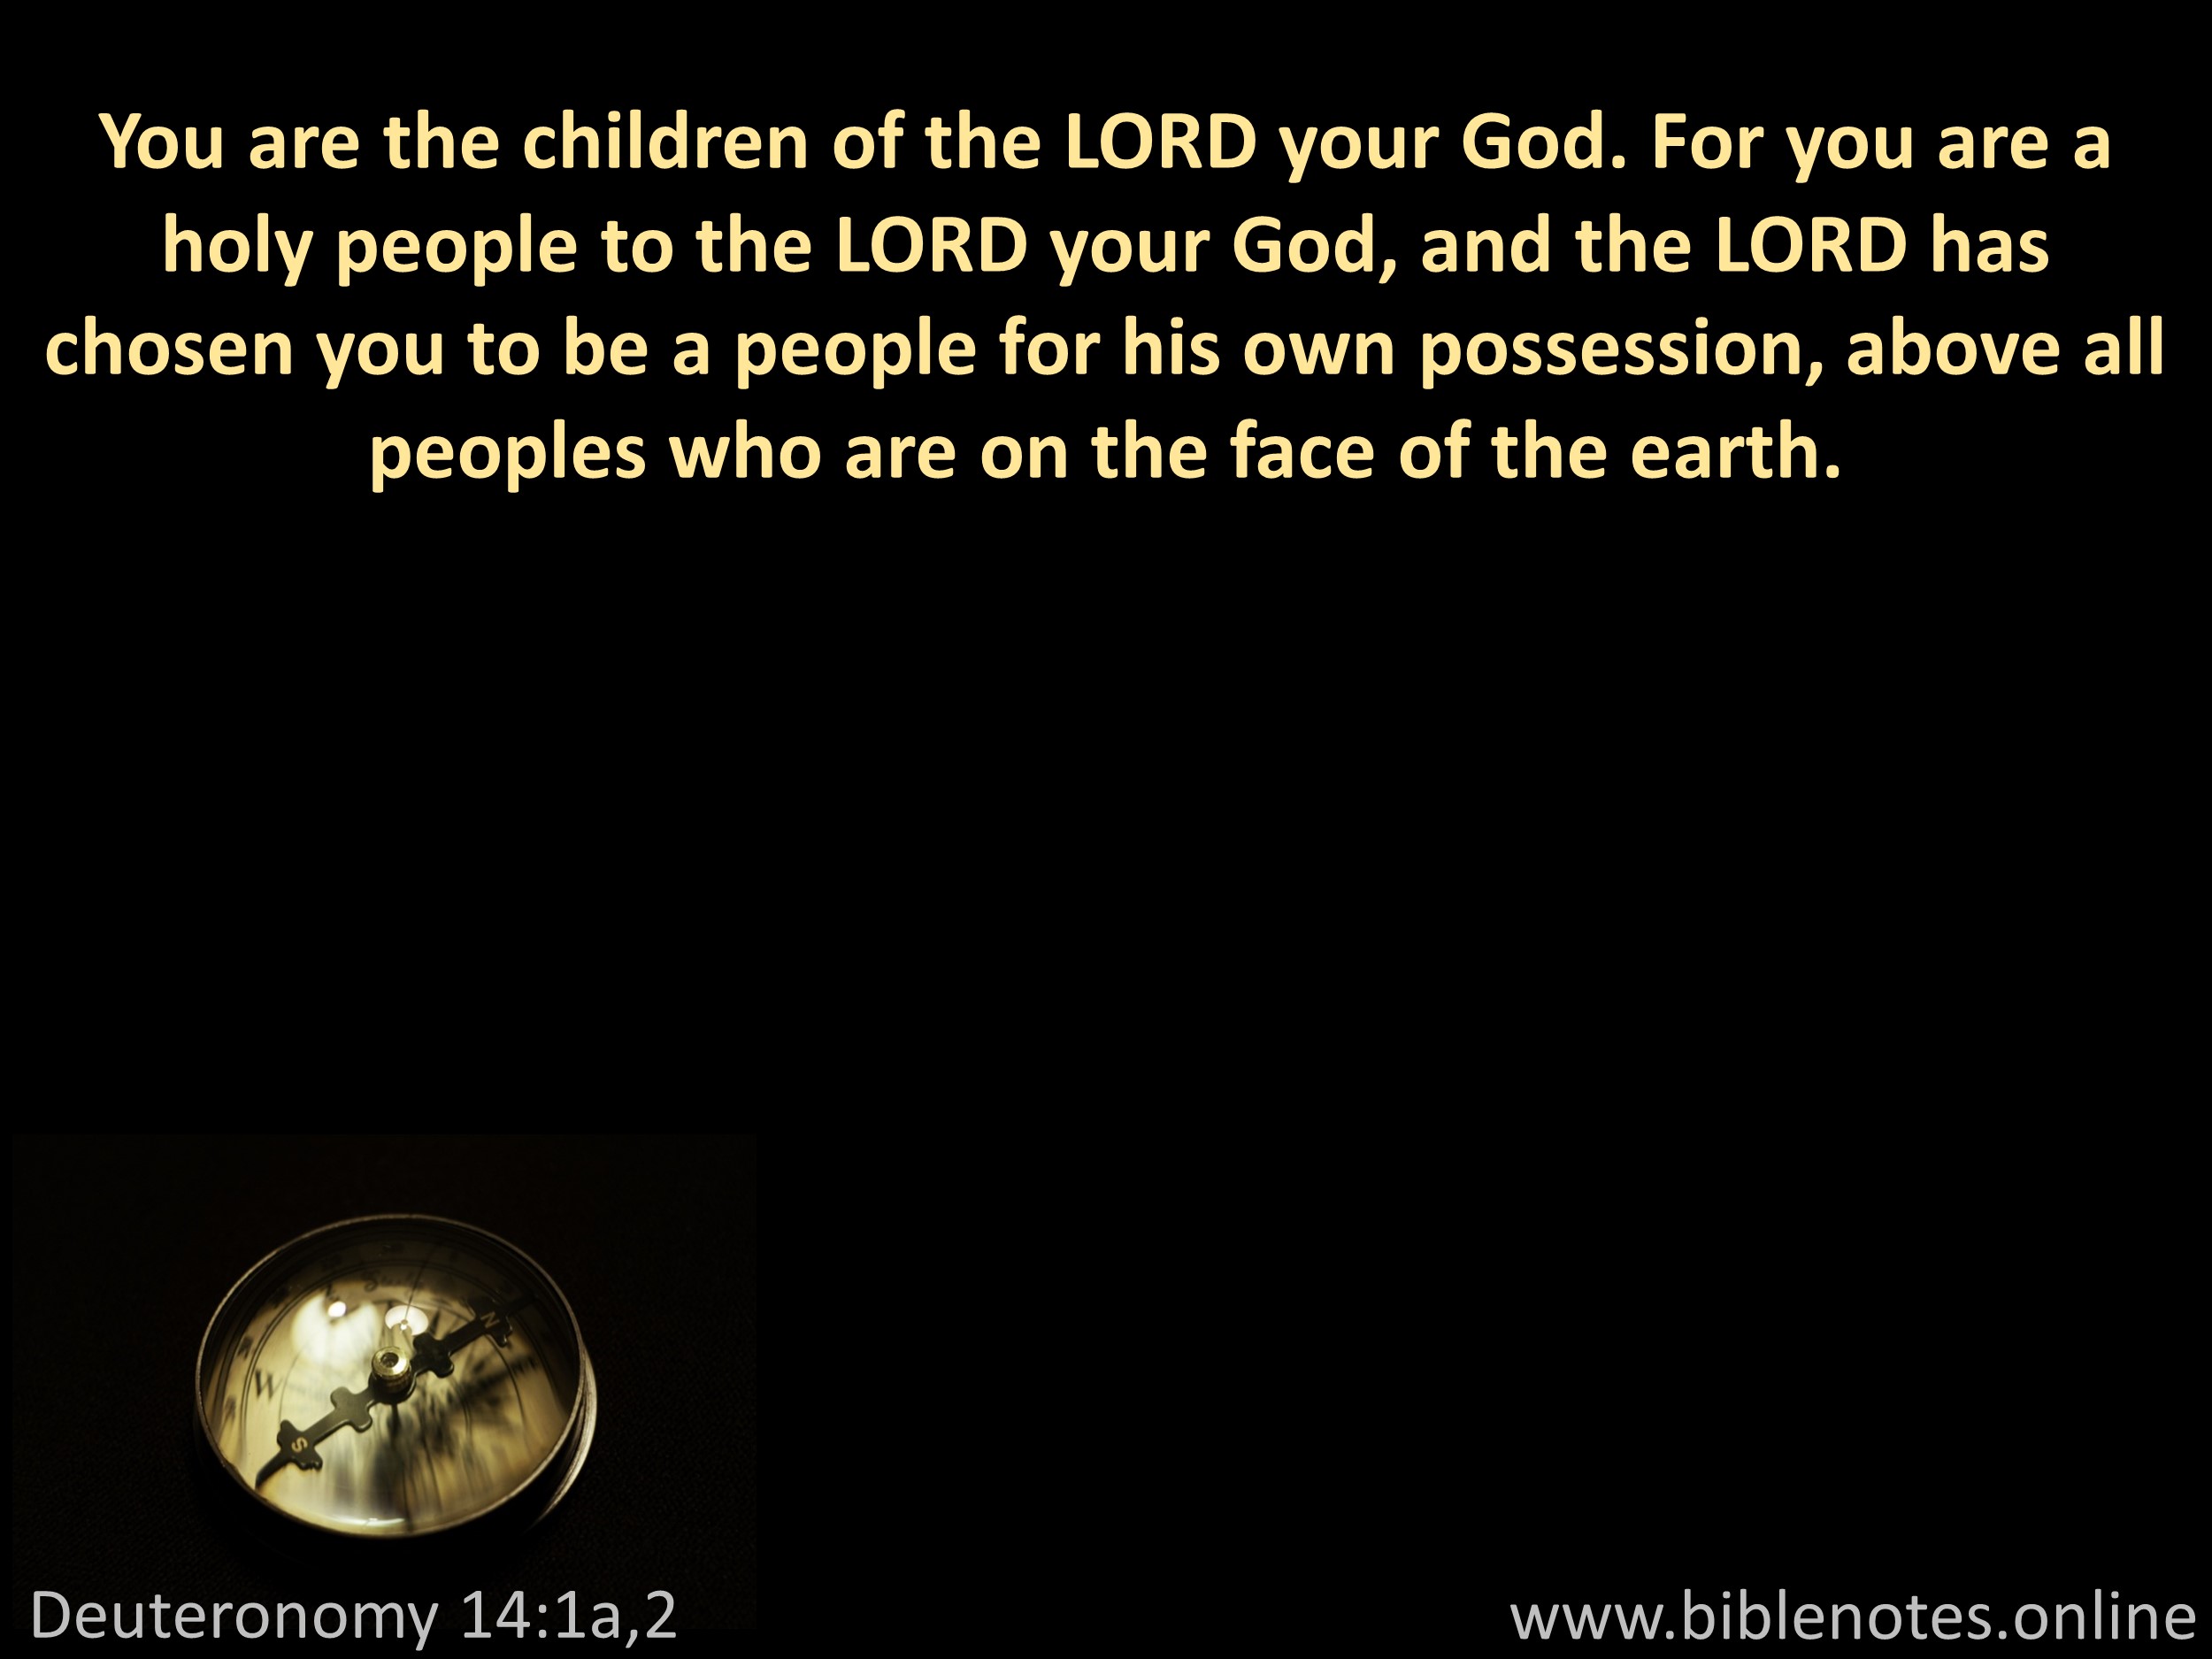 Bible Verse from Deuteronomy Chapter 14